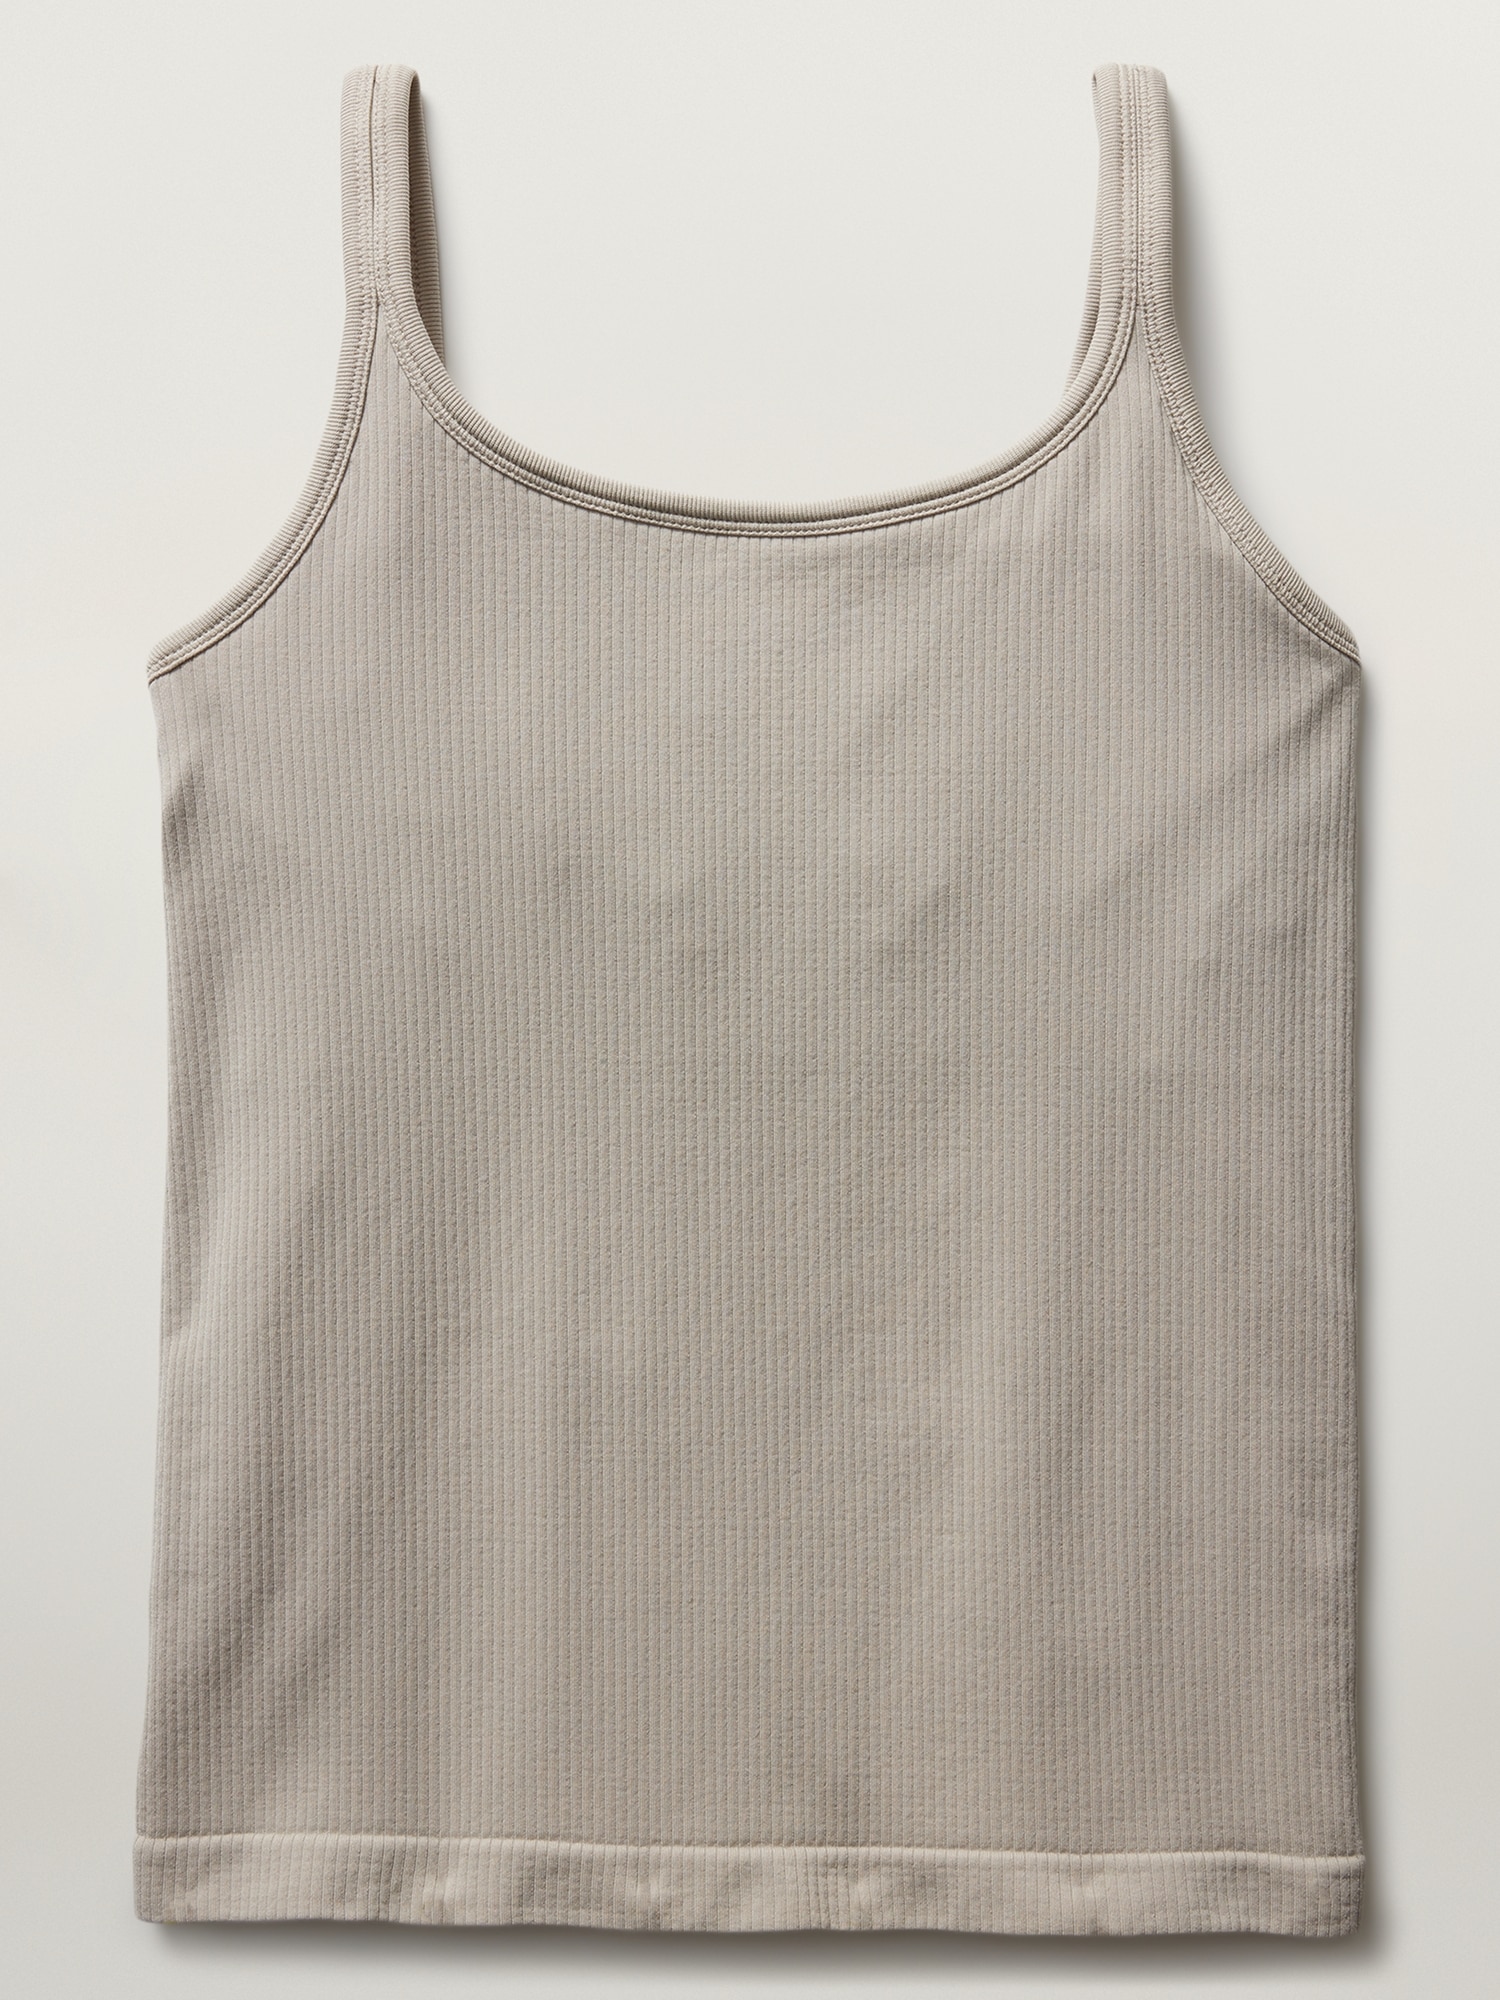 Design abprallen heavy are the hips that wear the strap shirt,tank